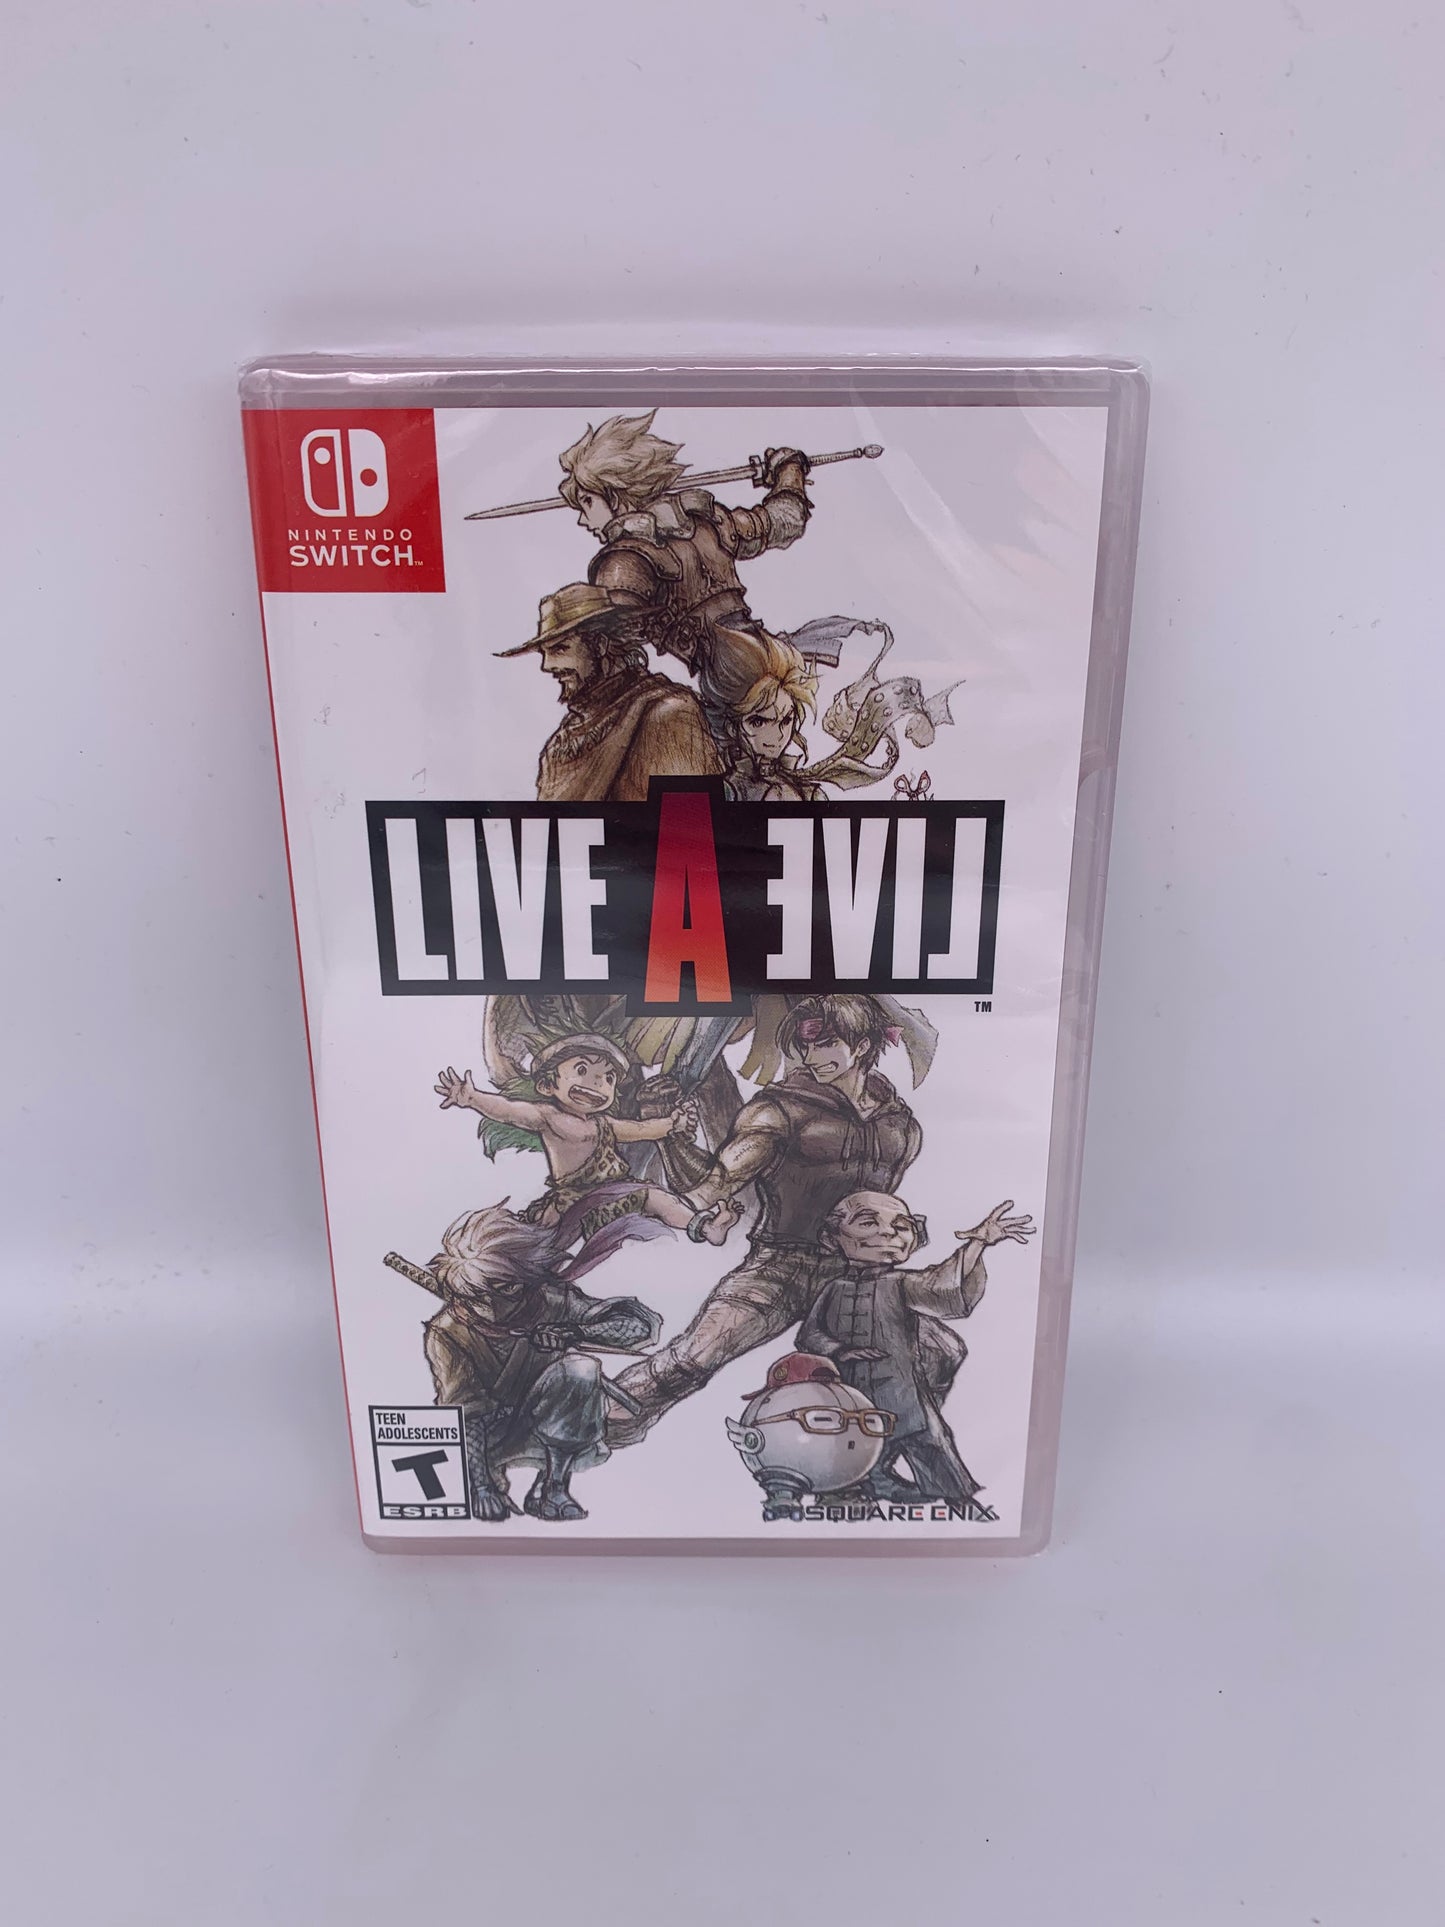 PiXEL-RETRO.COM : NINTENDO SWITCH NEW SEALED IN BOX COMPLETE MANUAL GAME NTSC LIVE A LIVE